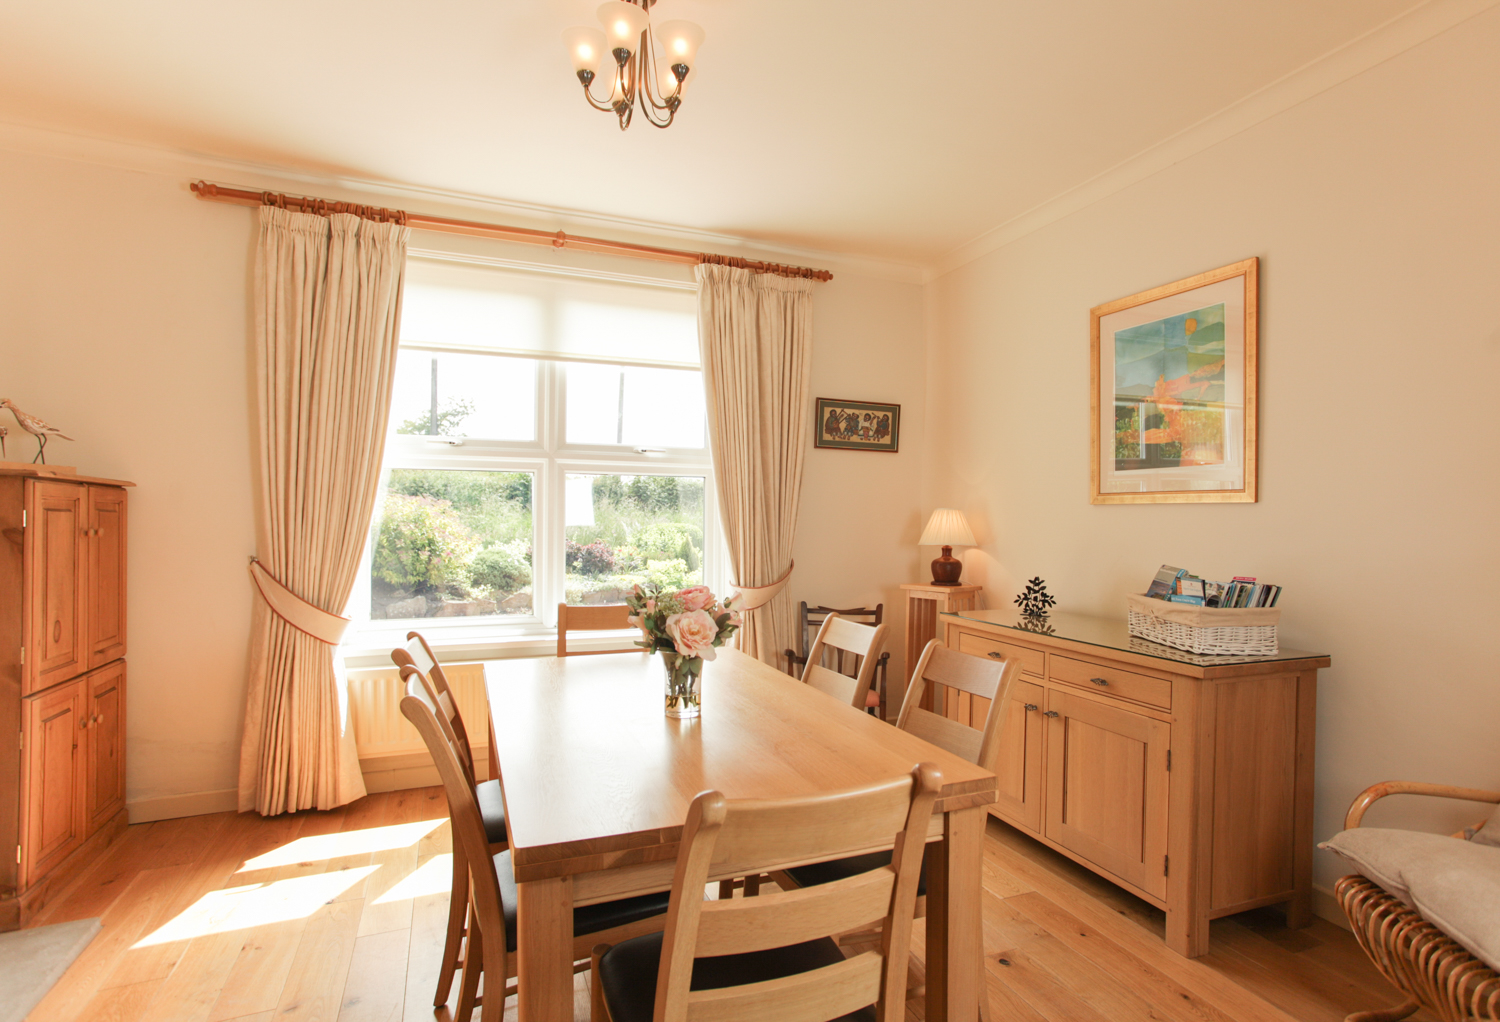 PICTORIAL_BERWICK_bamburgh-seahouses-alnwick-holiday-home-photographer-bright-fresh-clean-siobhan-4114.jpg